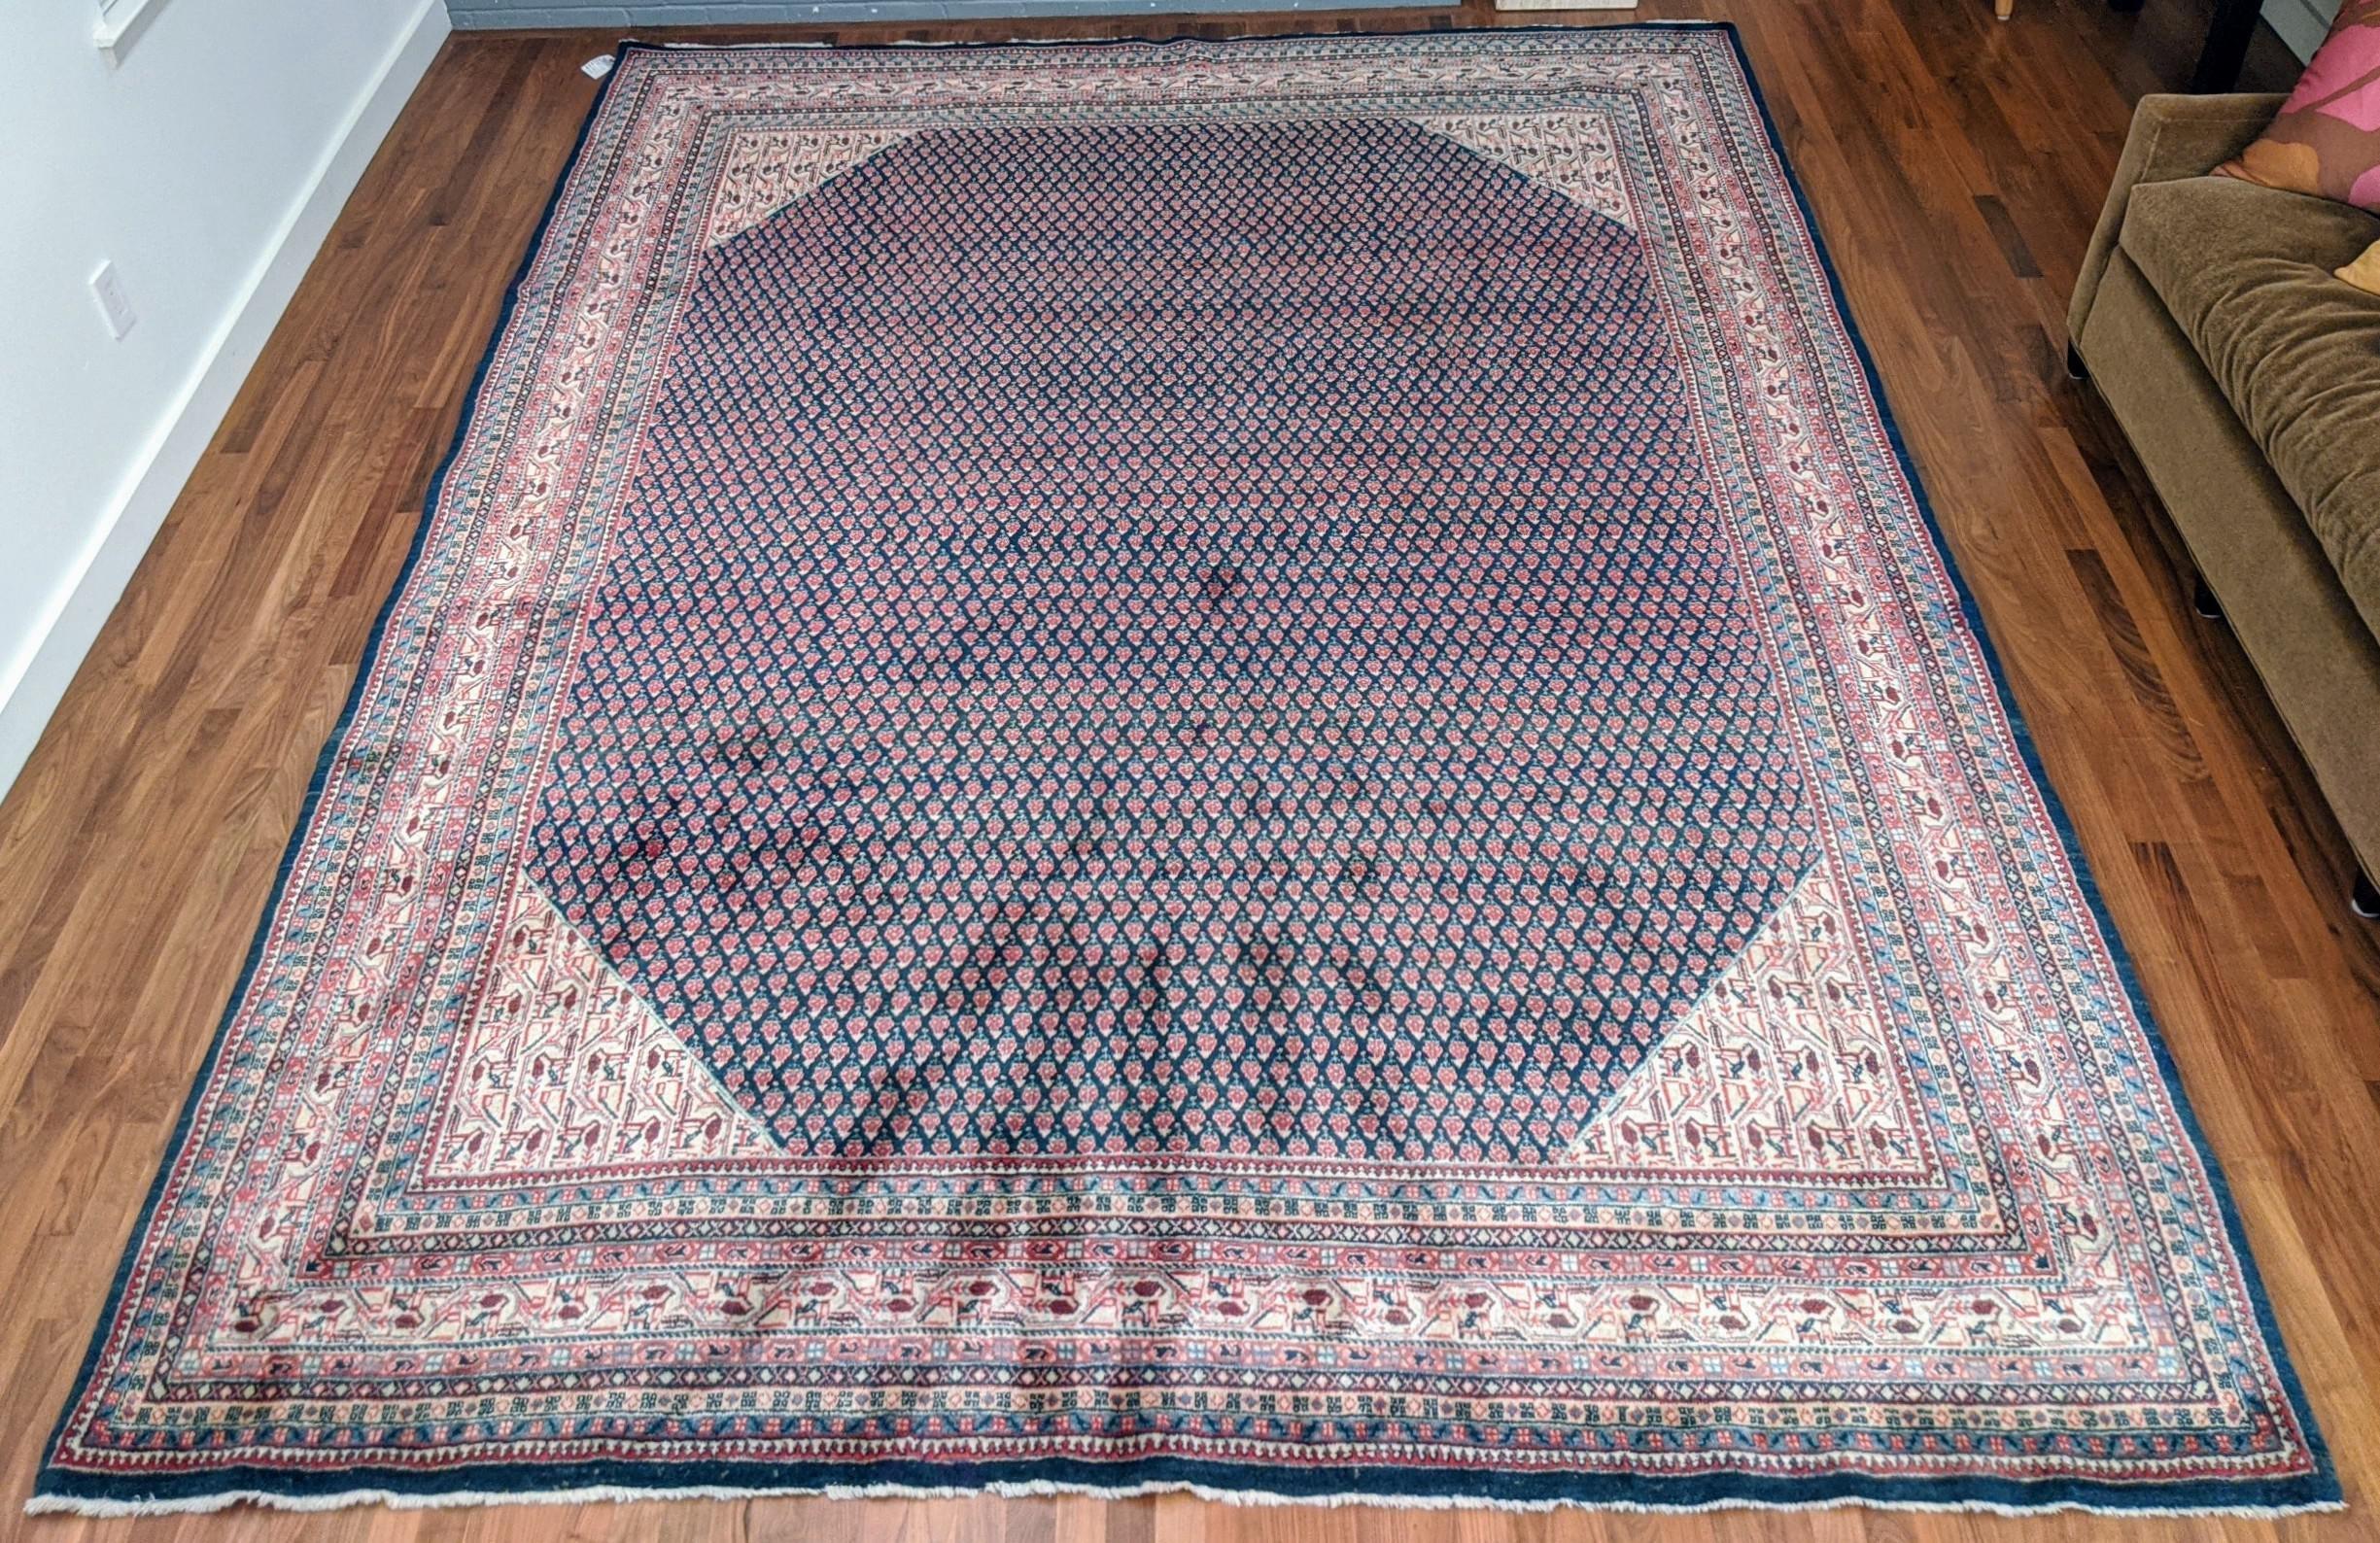 Authentic Handknotted Persian Mir 1940s Rug 9'x12' For Sale 5